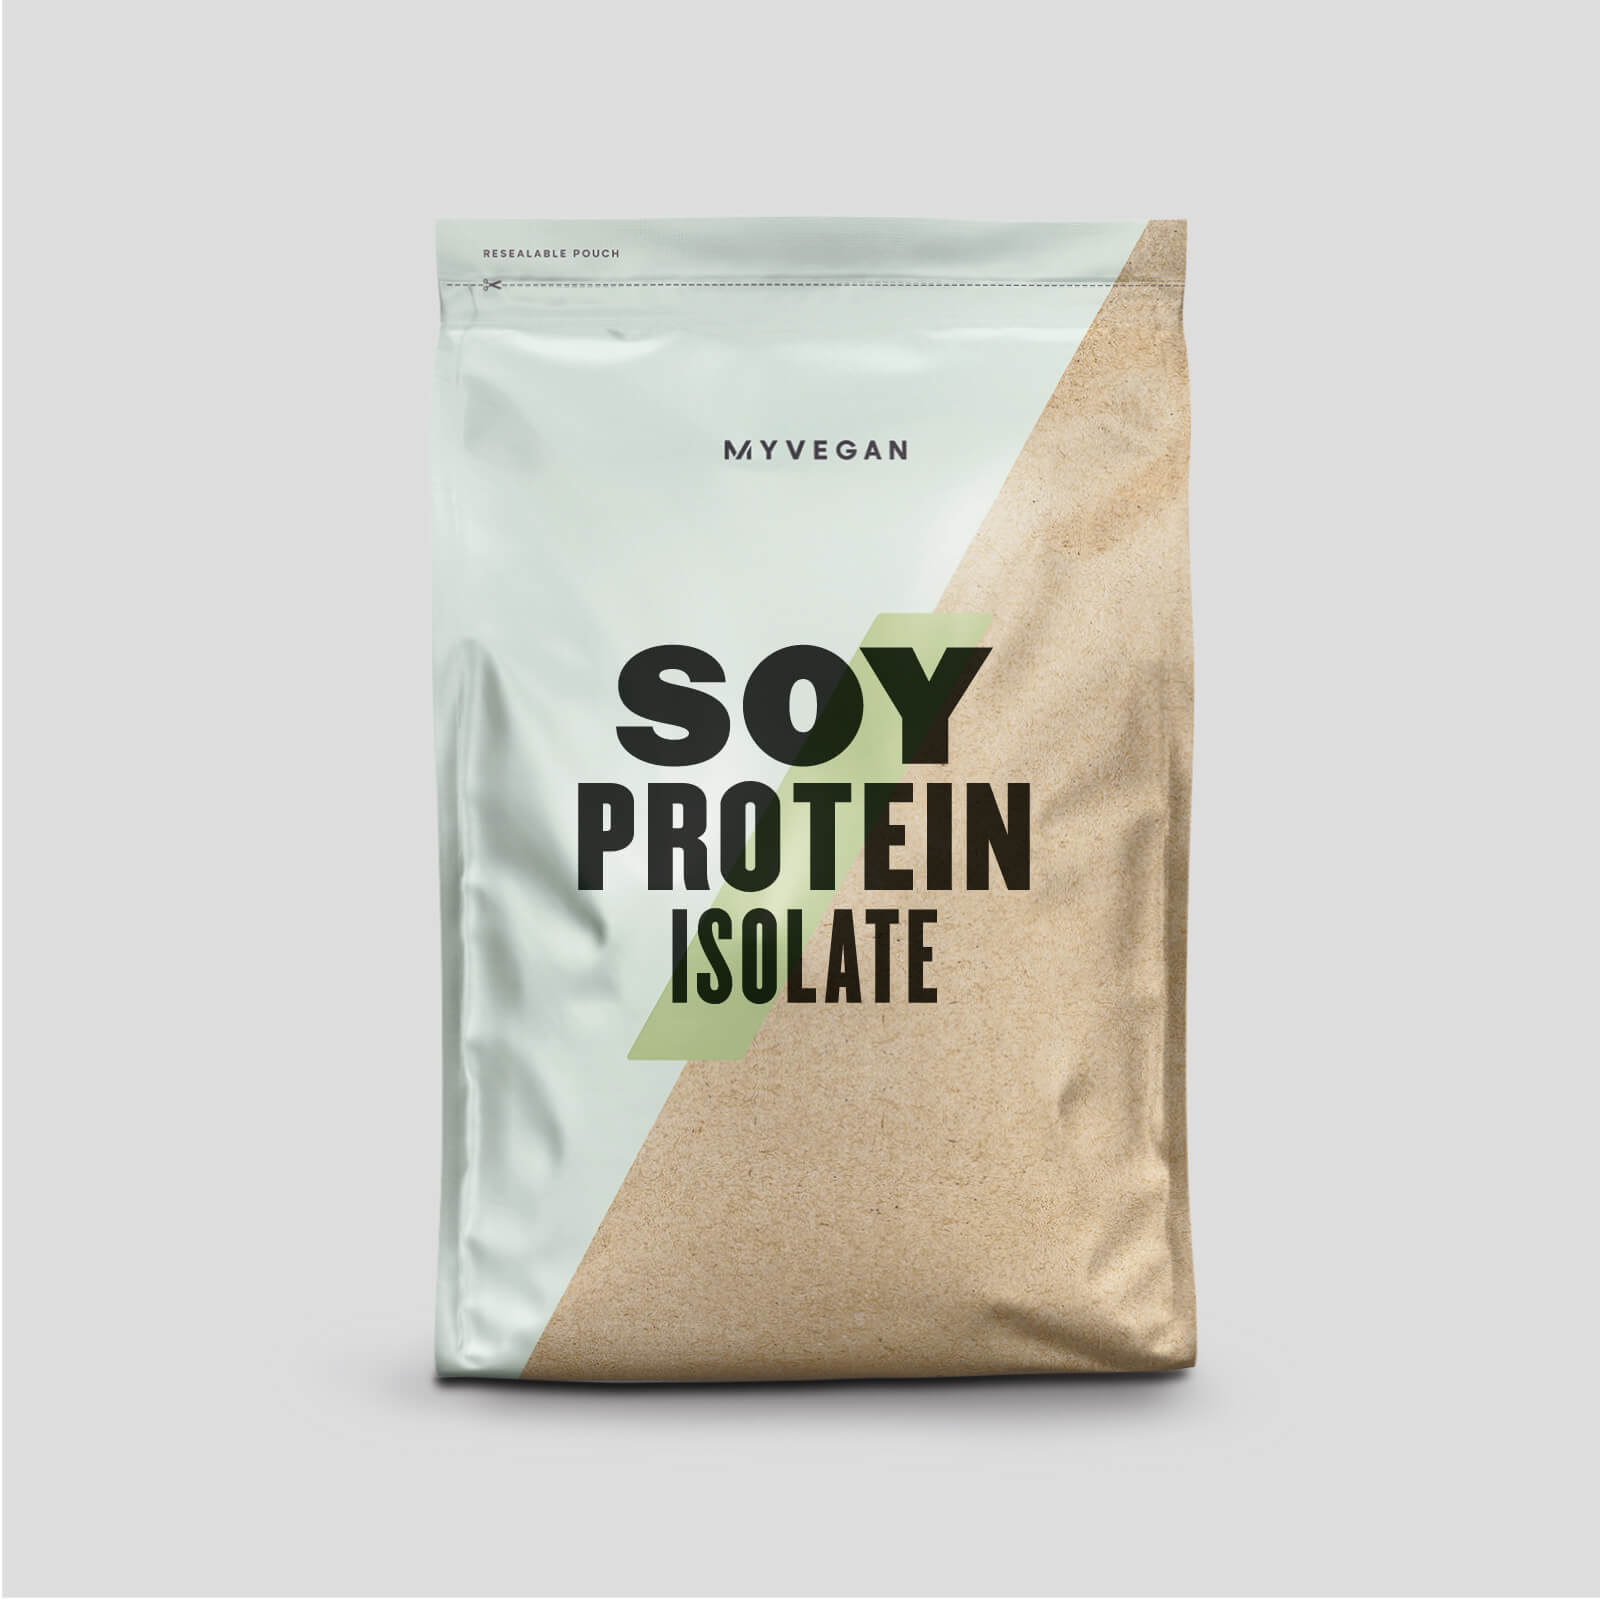 Myprotein Soy Protein Isolate - 2.5kg - Unflavoured